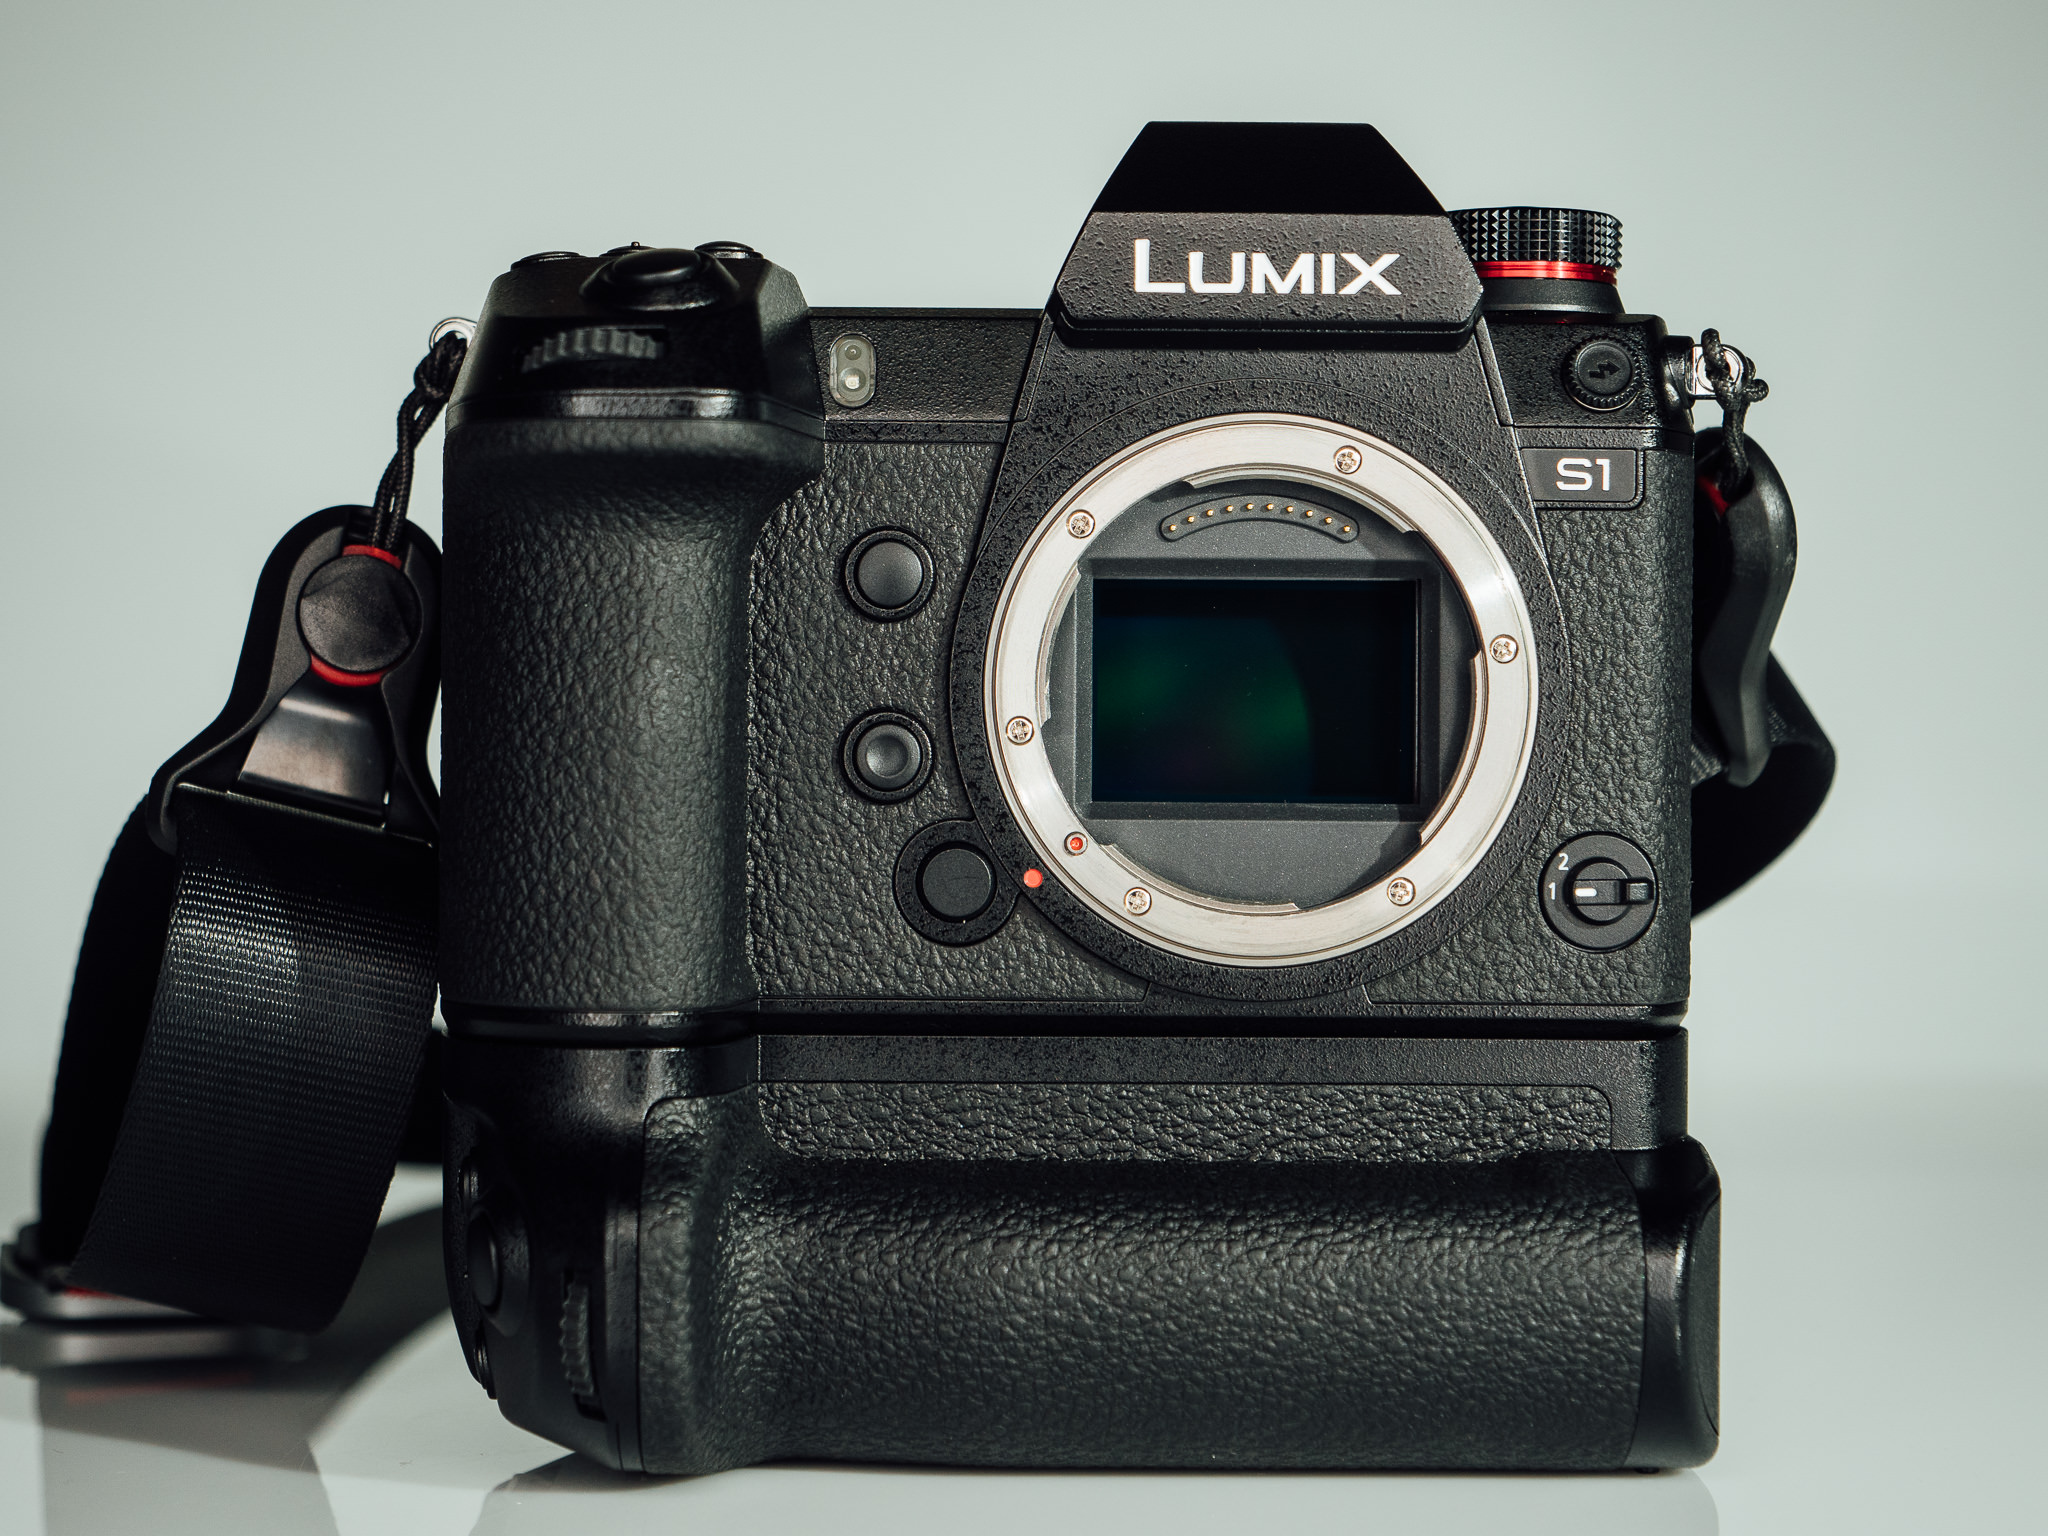 Panasonic BGS1 battery grip for the LUMIX S1 and S1R